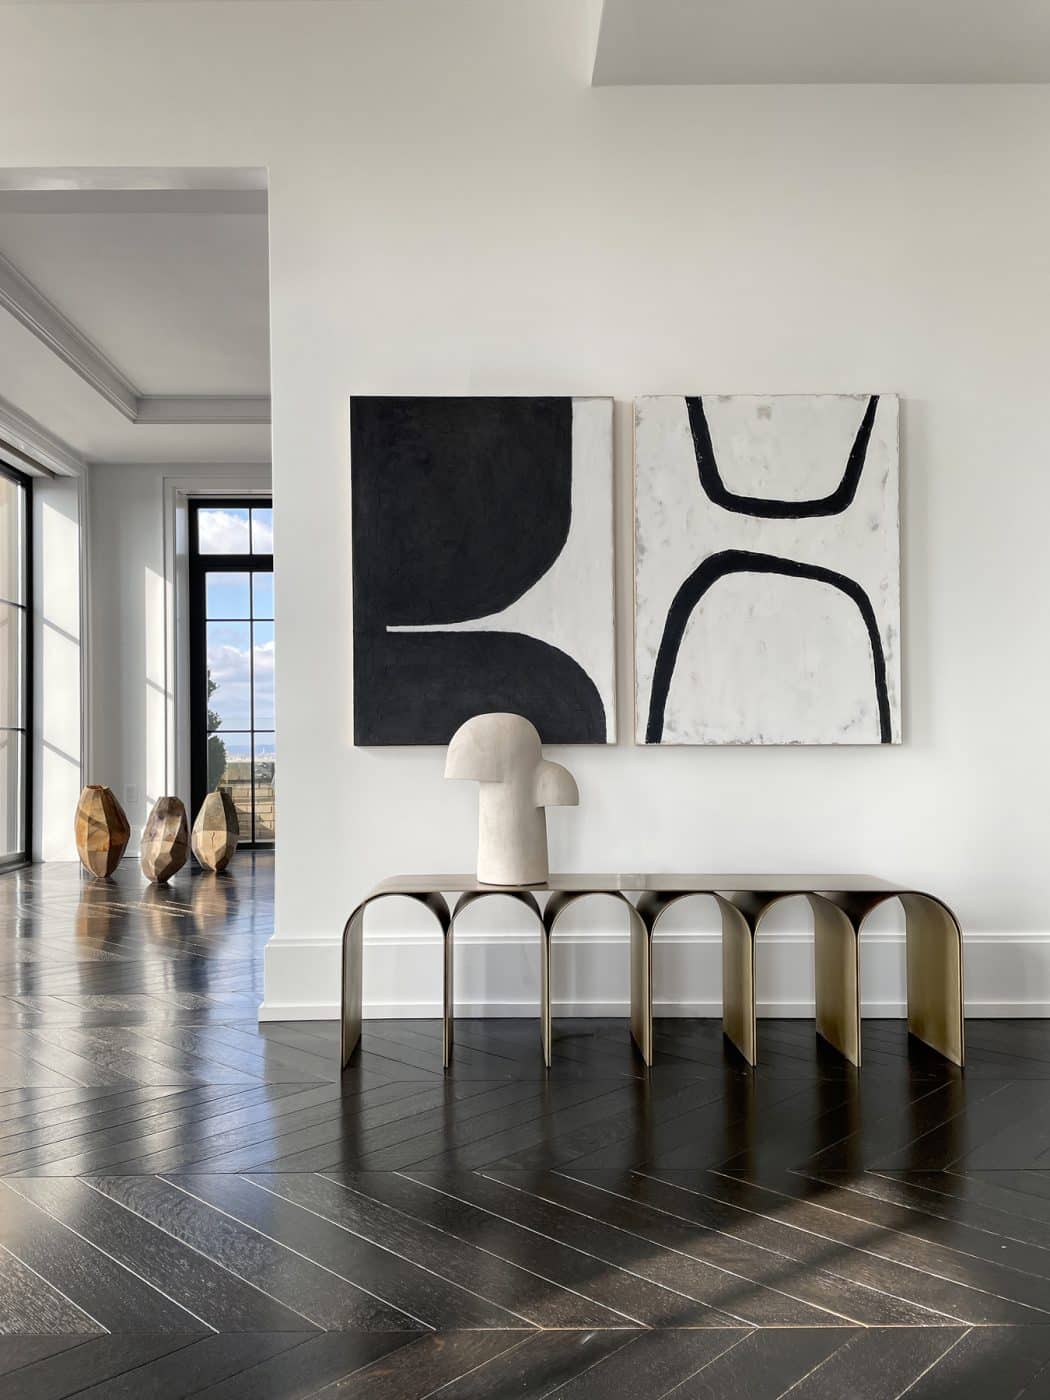 Pietro Franceschini's brass Gold Arch bench in the living room area of Galerie Philia's staged apartment in New York's Walker Tower